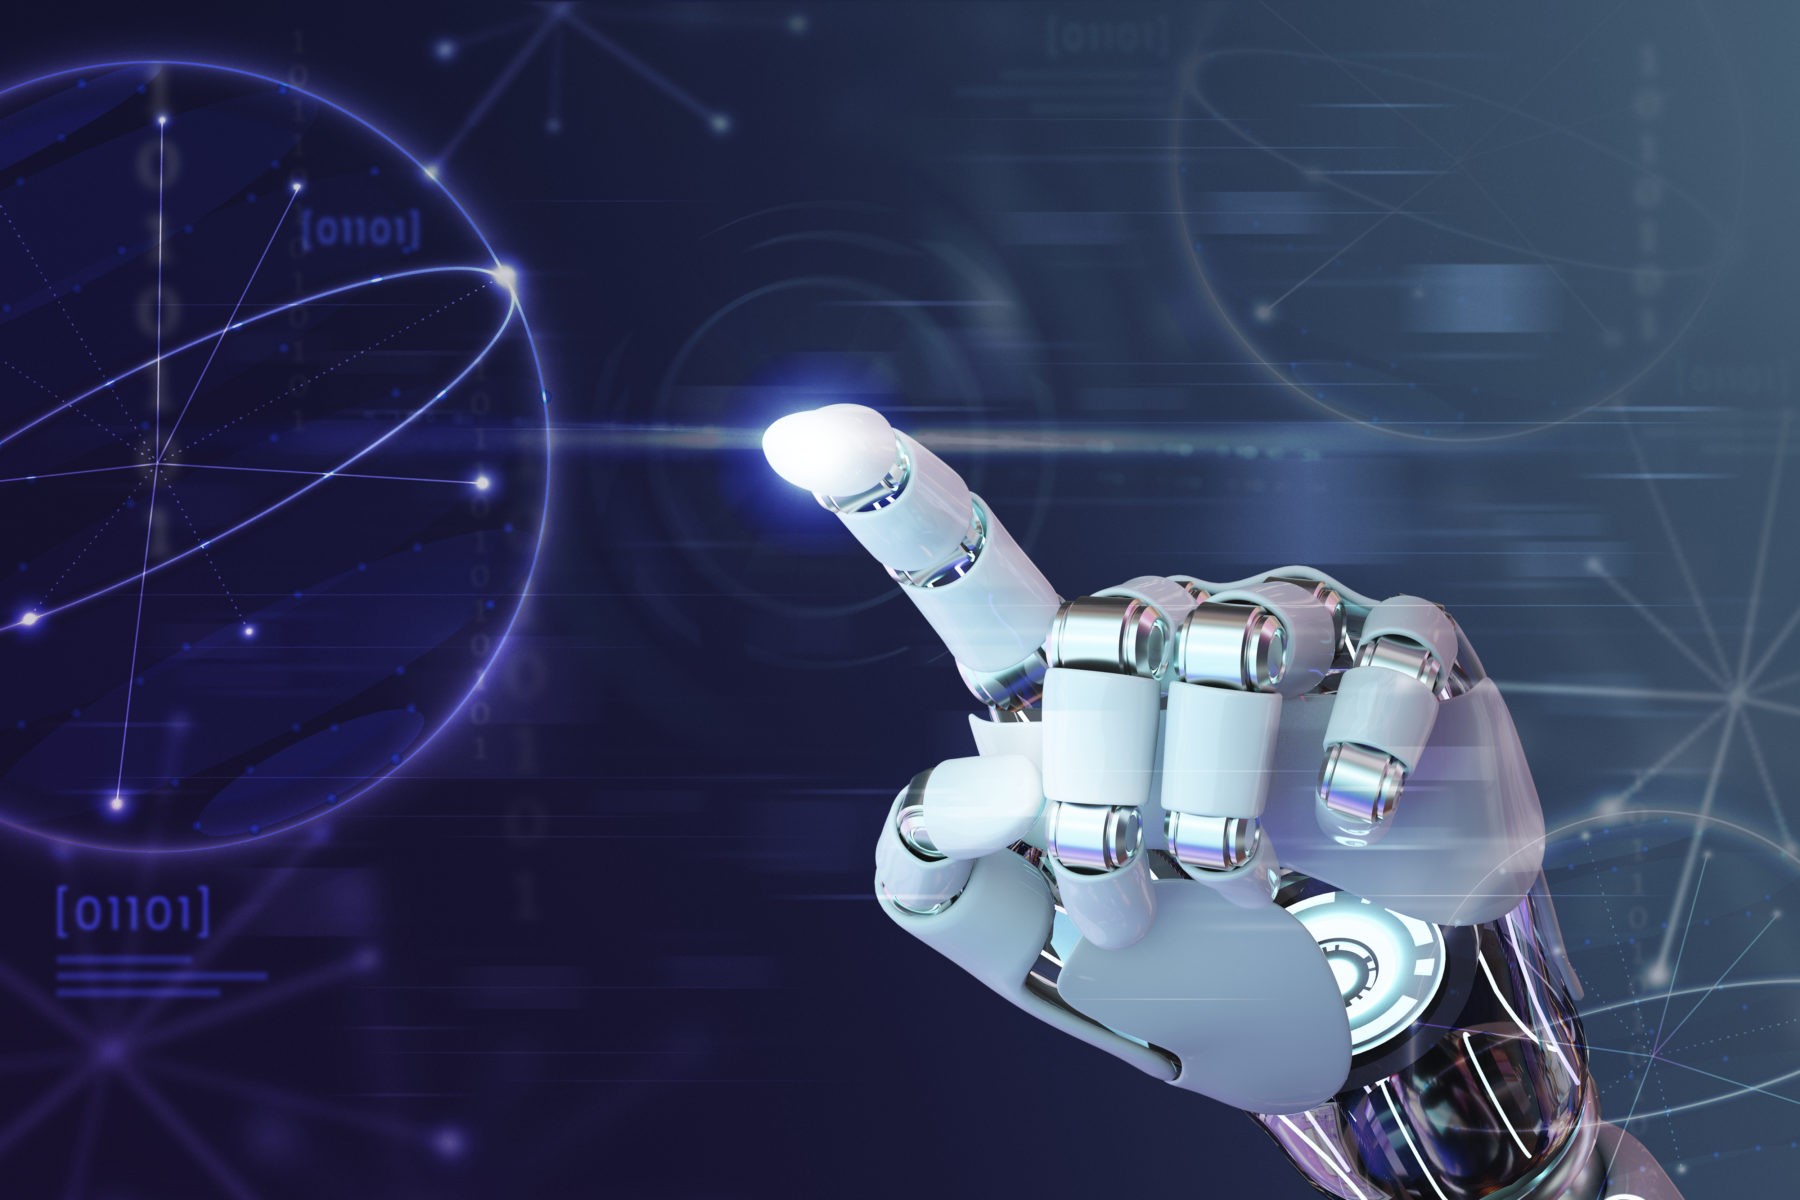 <a href="https://www.freepik.com/free-photo/robot-hand-finger-ai-background-technology-graphics_17851034.htm#query=ai%20cooperation&position=30&from_view=search&track=ais">Image by rawpixel.com</a> on Freepik